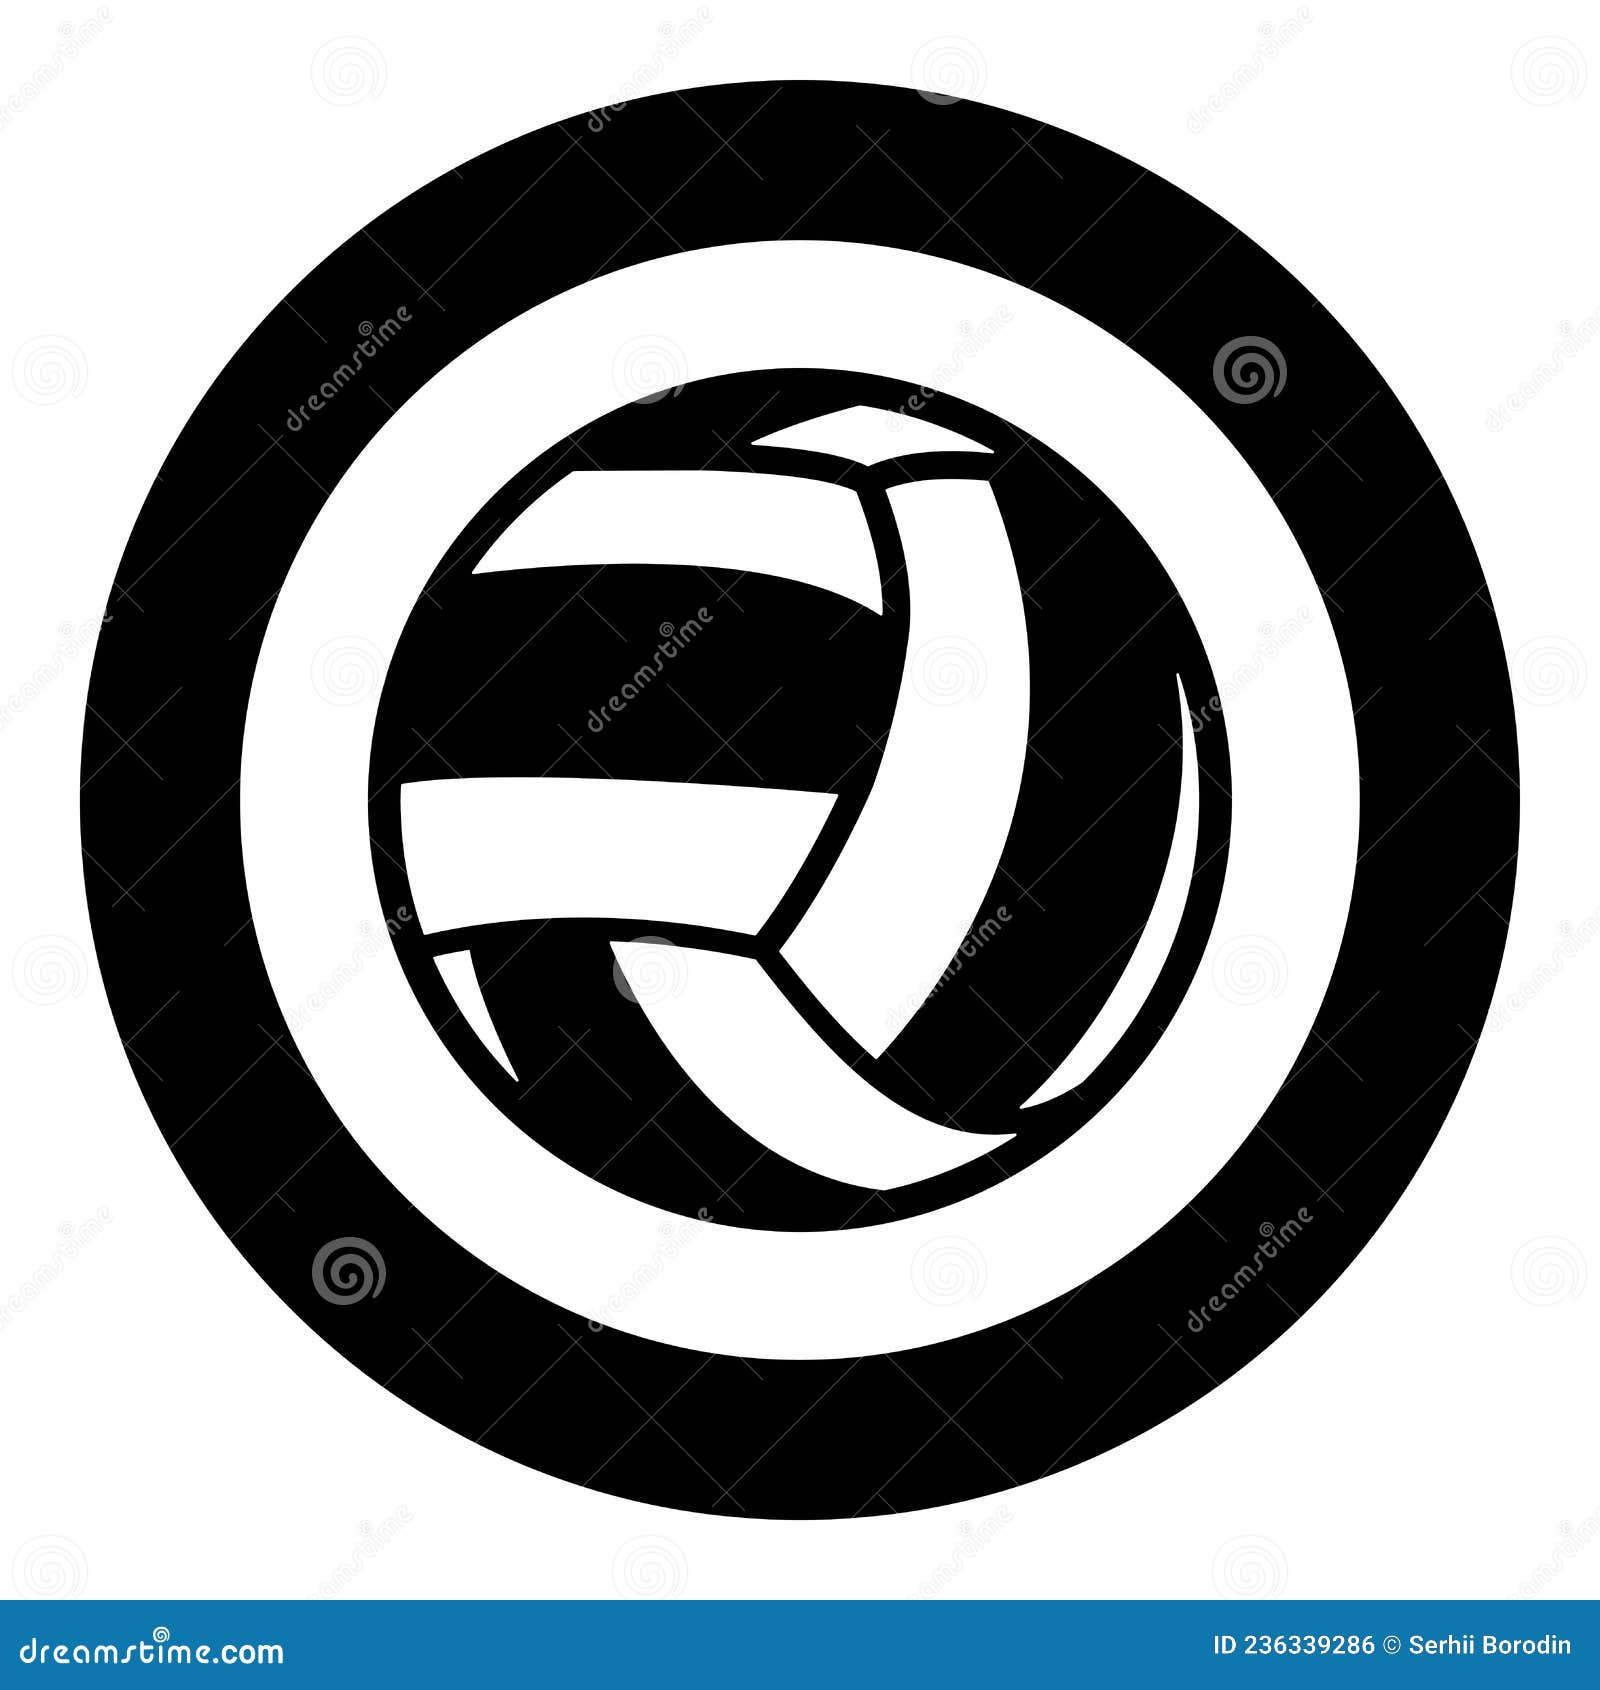 Volleyball Ball Sport Equipment Icon in Circle Round Black Color Vector ...